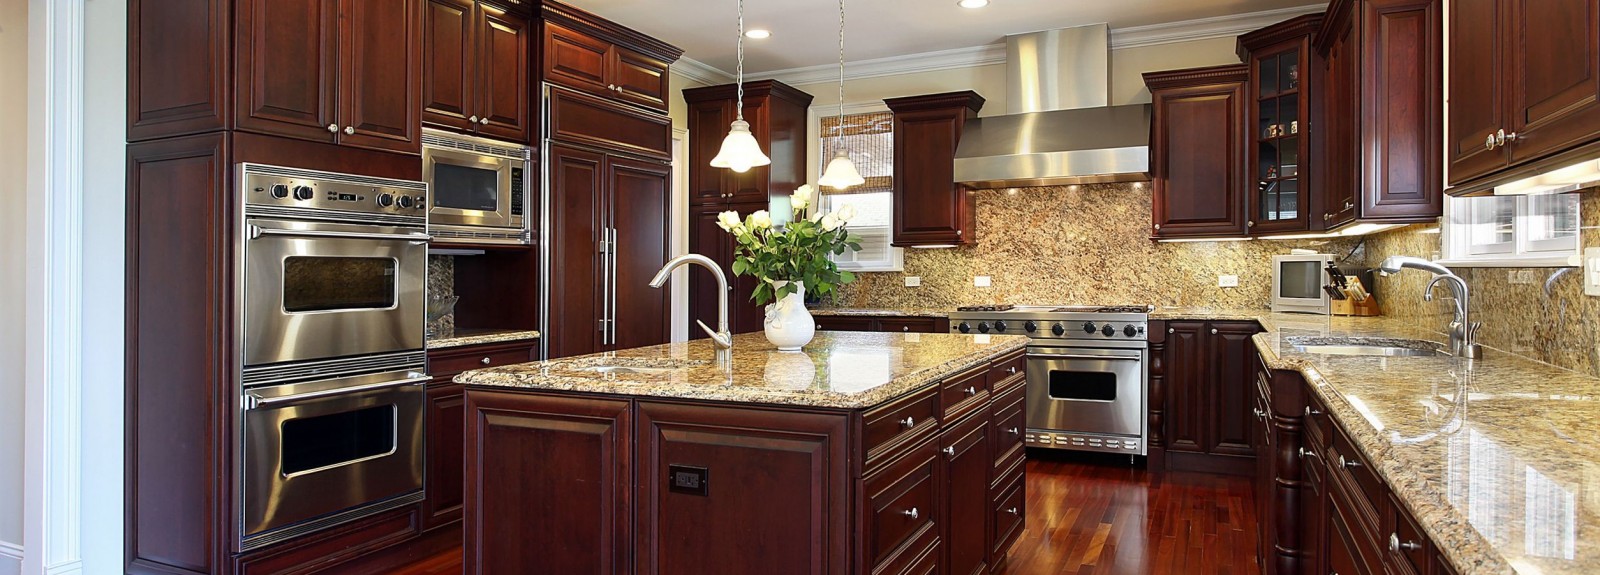 Kitchen with the darker cherry color cabinets